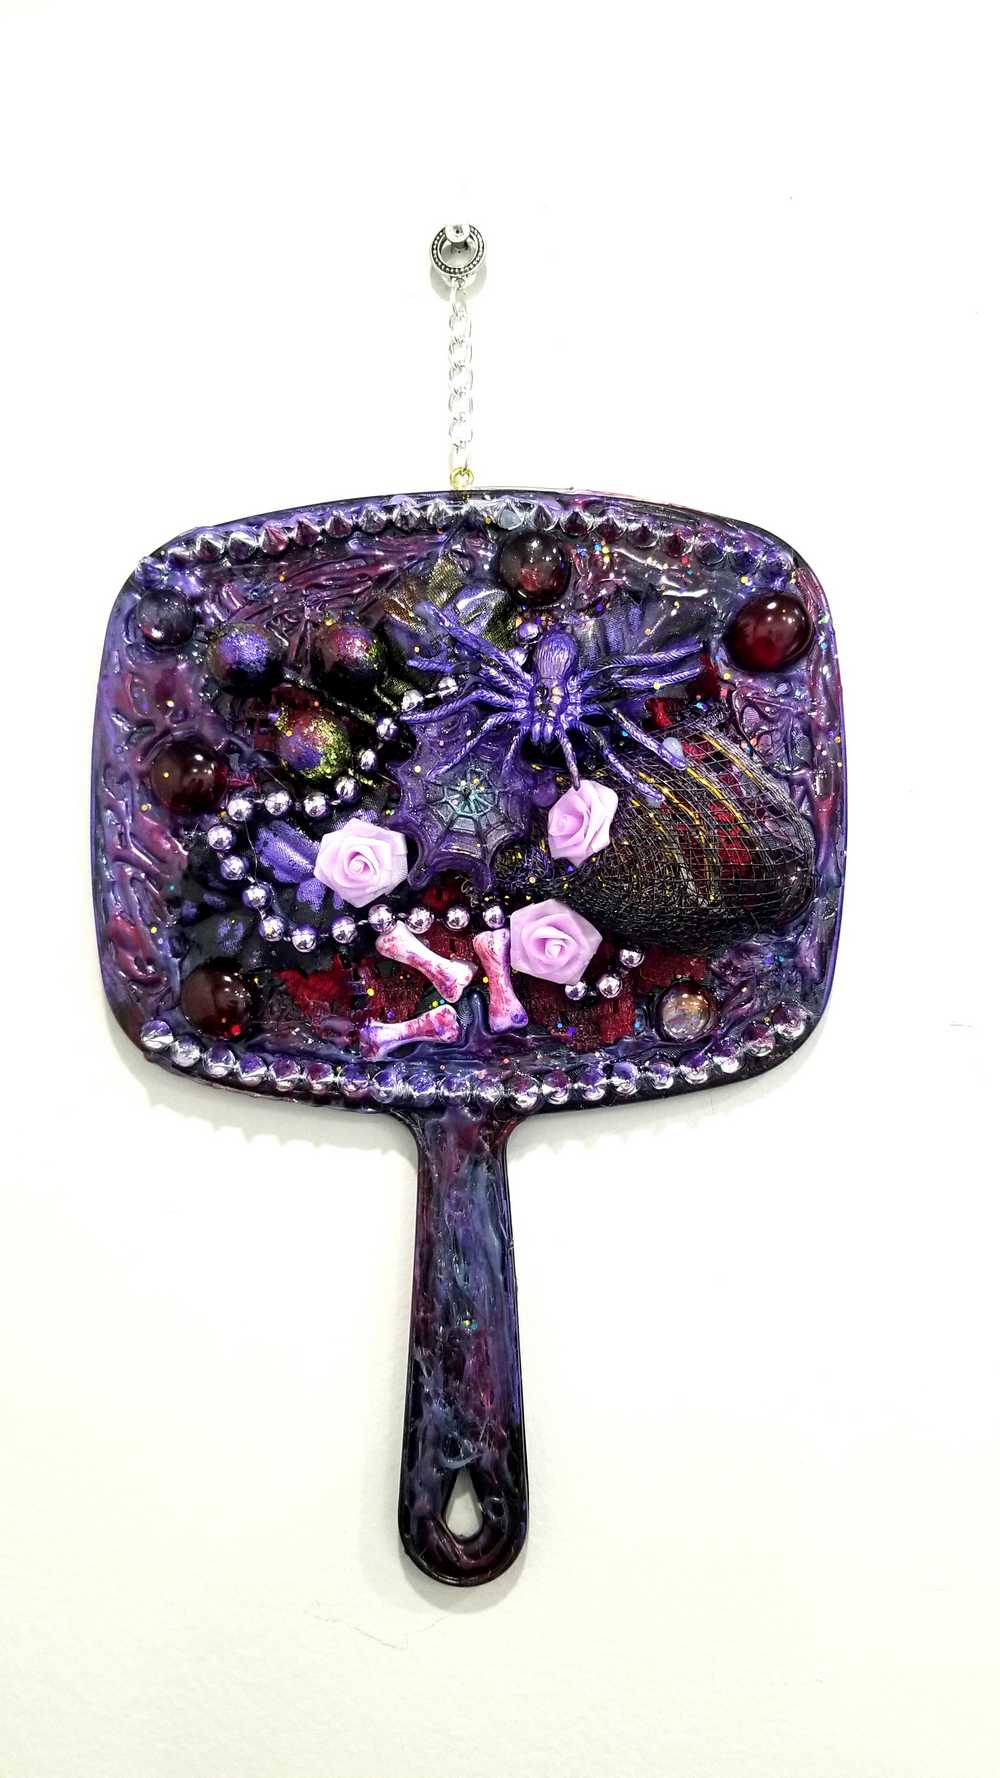 Black Hand Held Mirror with Bones, Roses, a Purple Spider and Her Web